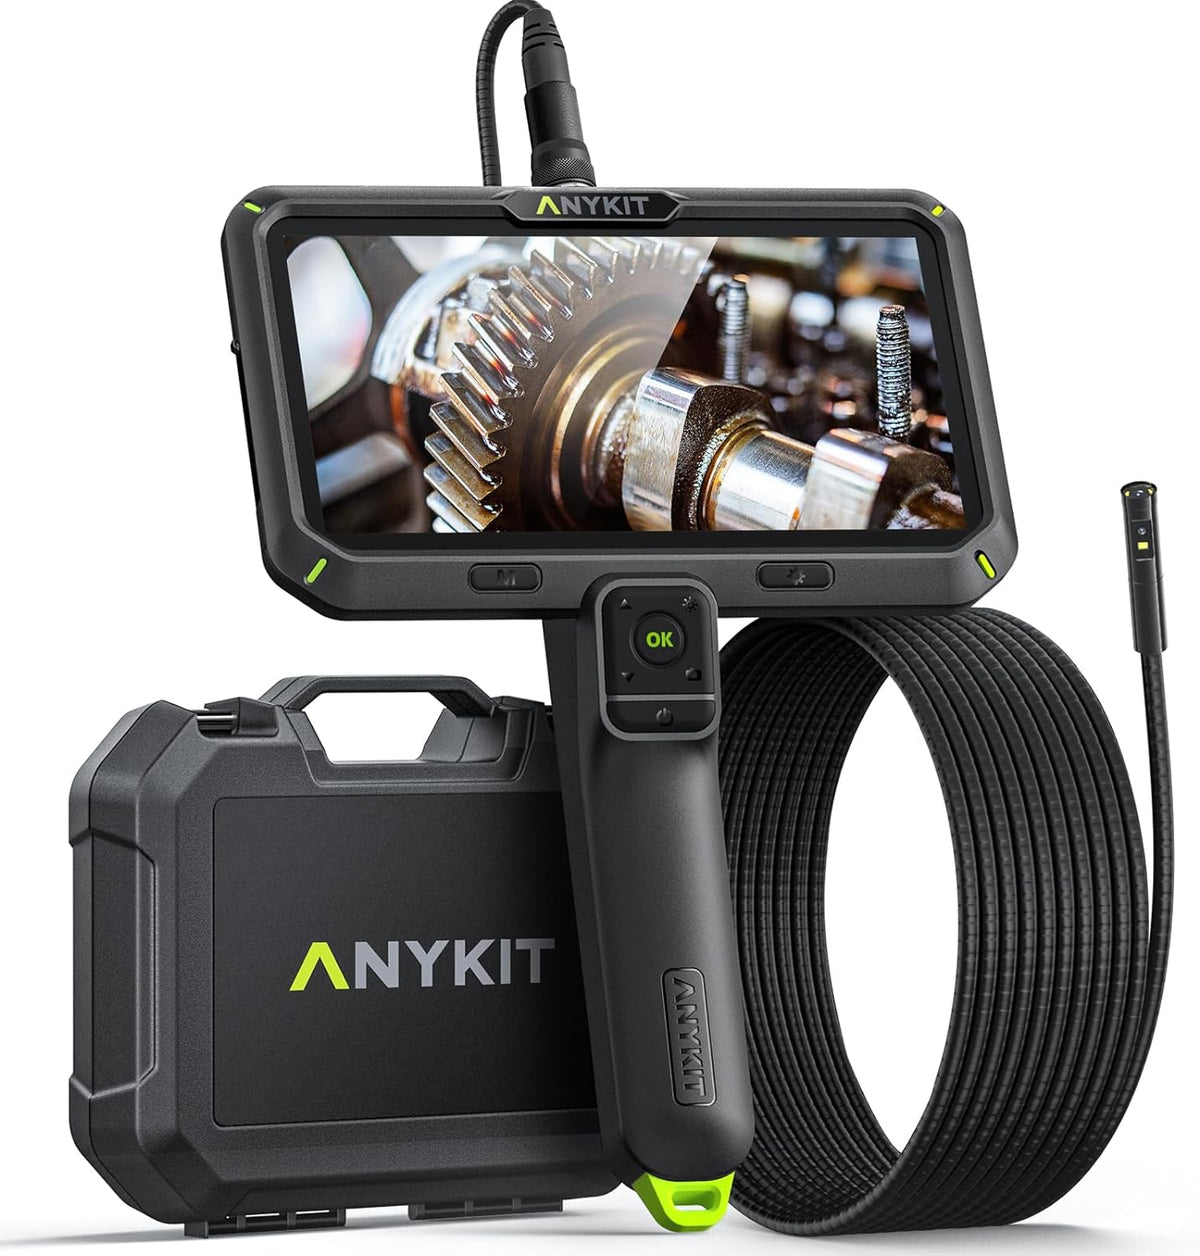 Anykit 6" IPS Screen Endoscope Camera with Light, Dual Lens Digital Inspection Camera with Split Screen, 1080P Industrial Borescope with WiFi Function, 16.5ft Flexible Gooseneck Snake Plumbing Camera